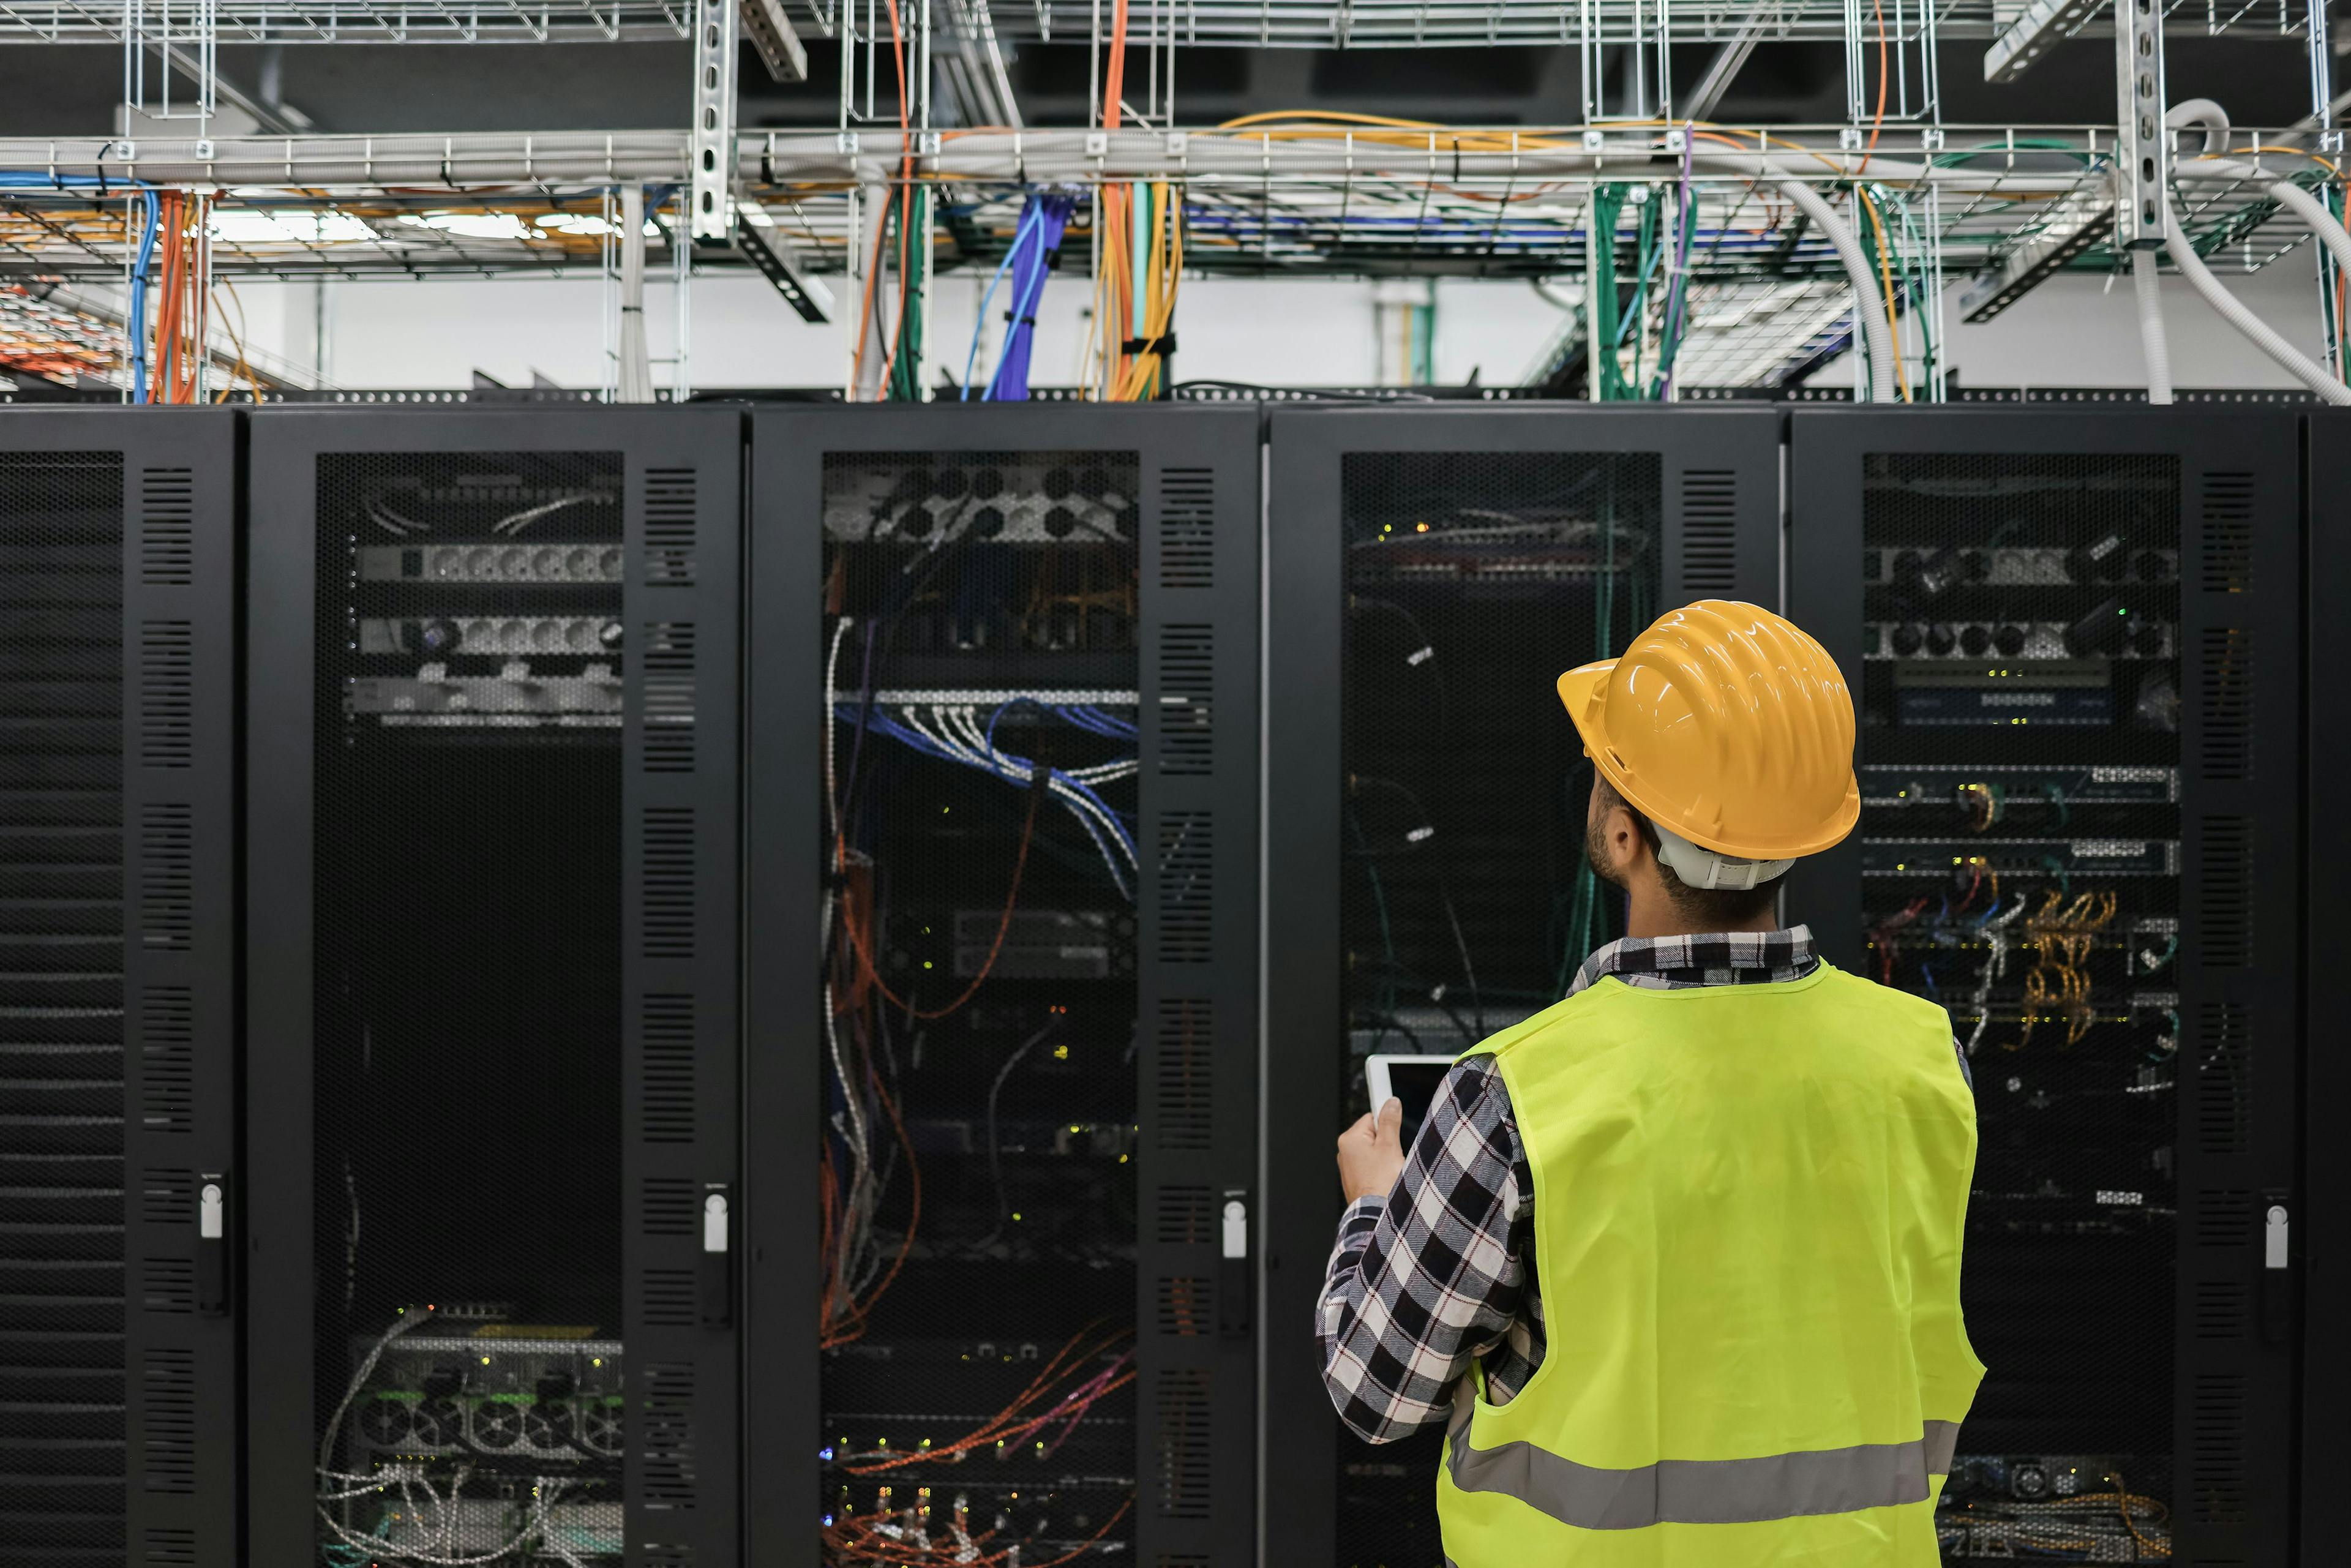 Young technician man working with tablet inside big data center room full of rack servers - Focus on man head. Image Credit: Adobe Stock Images/DisobeyArt